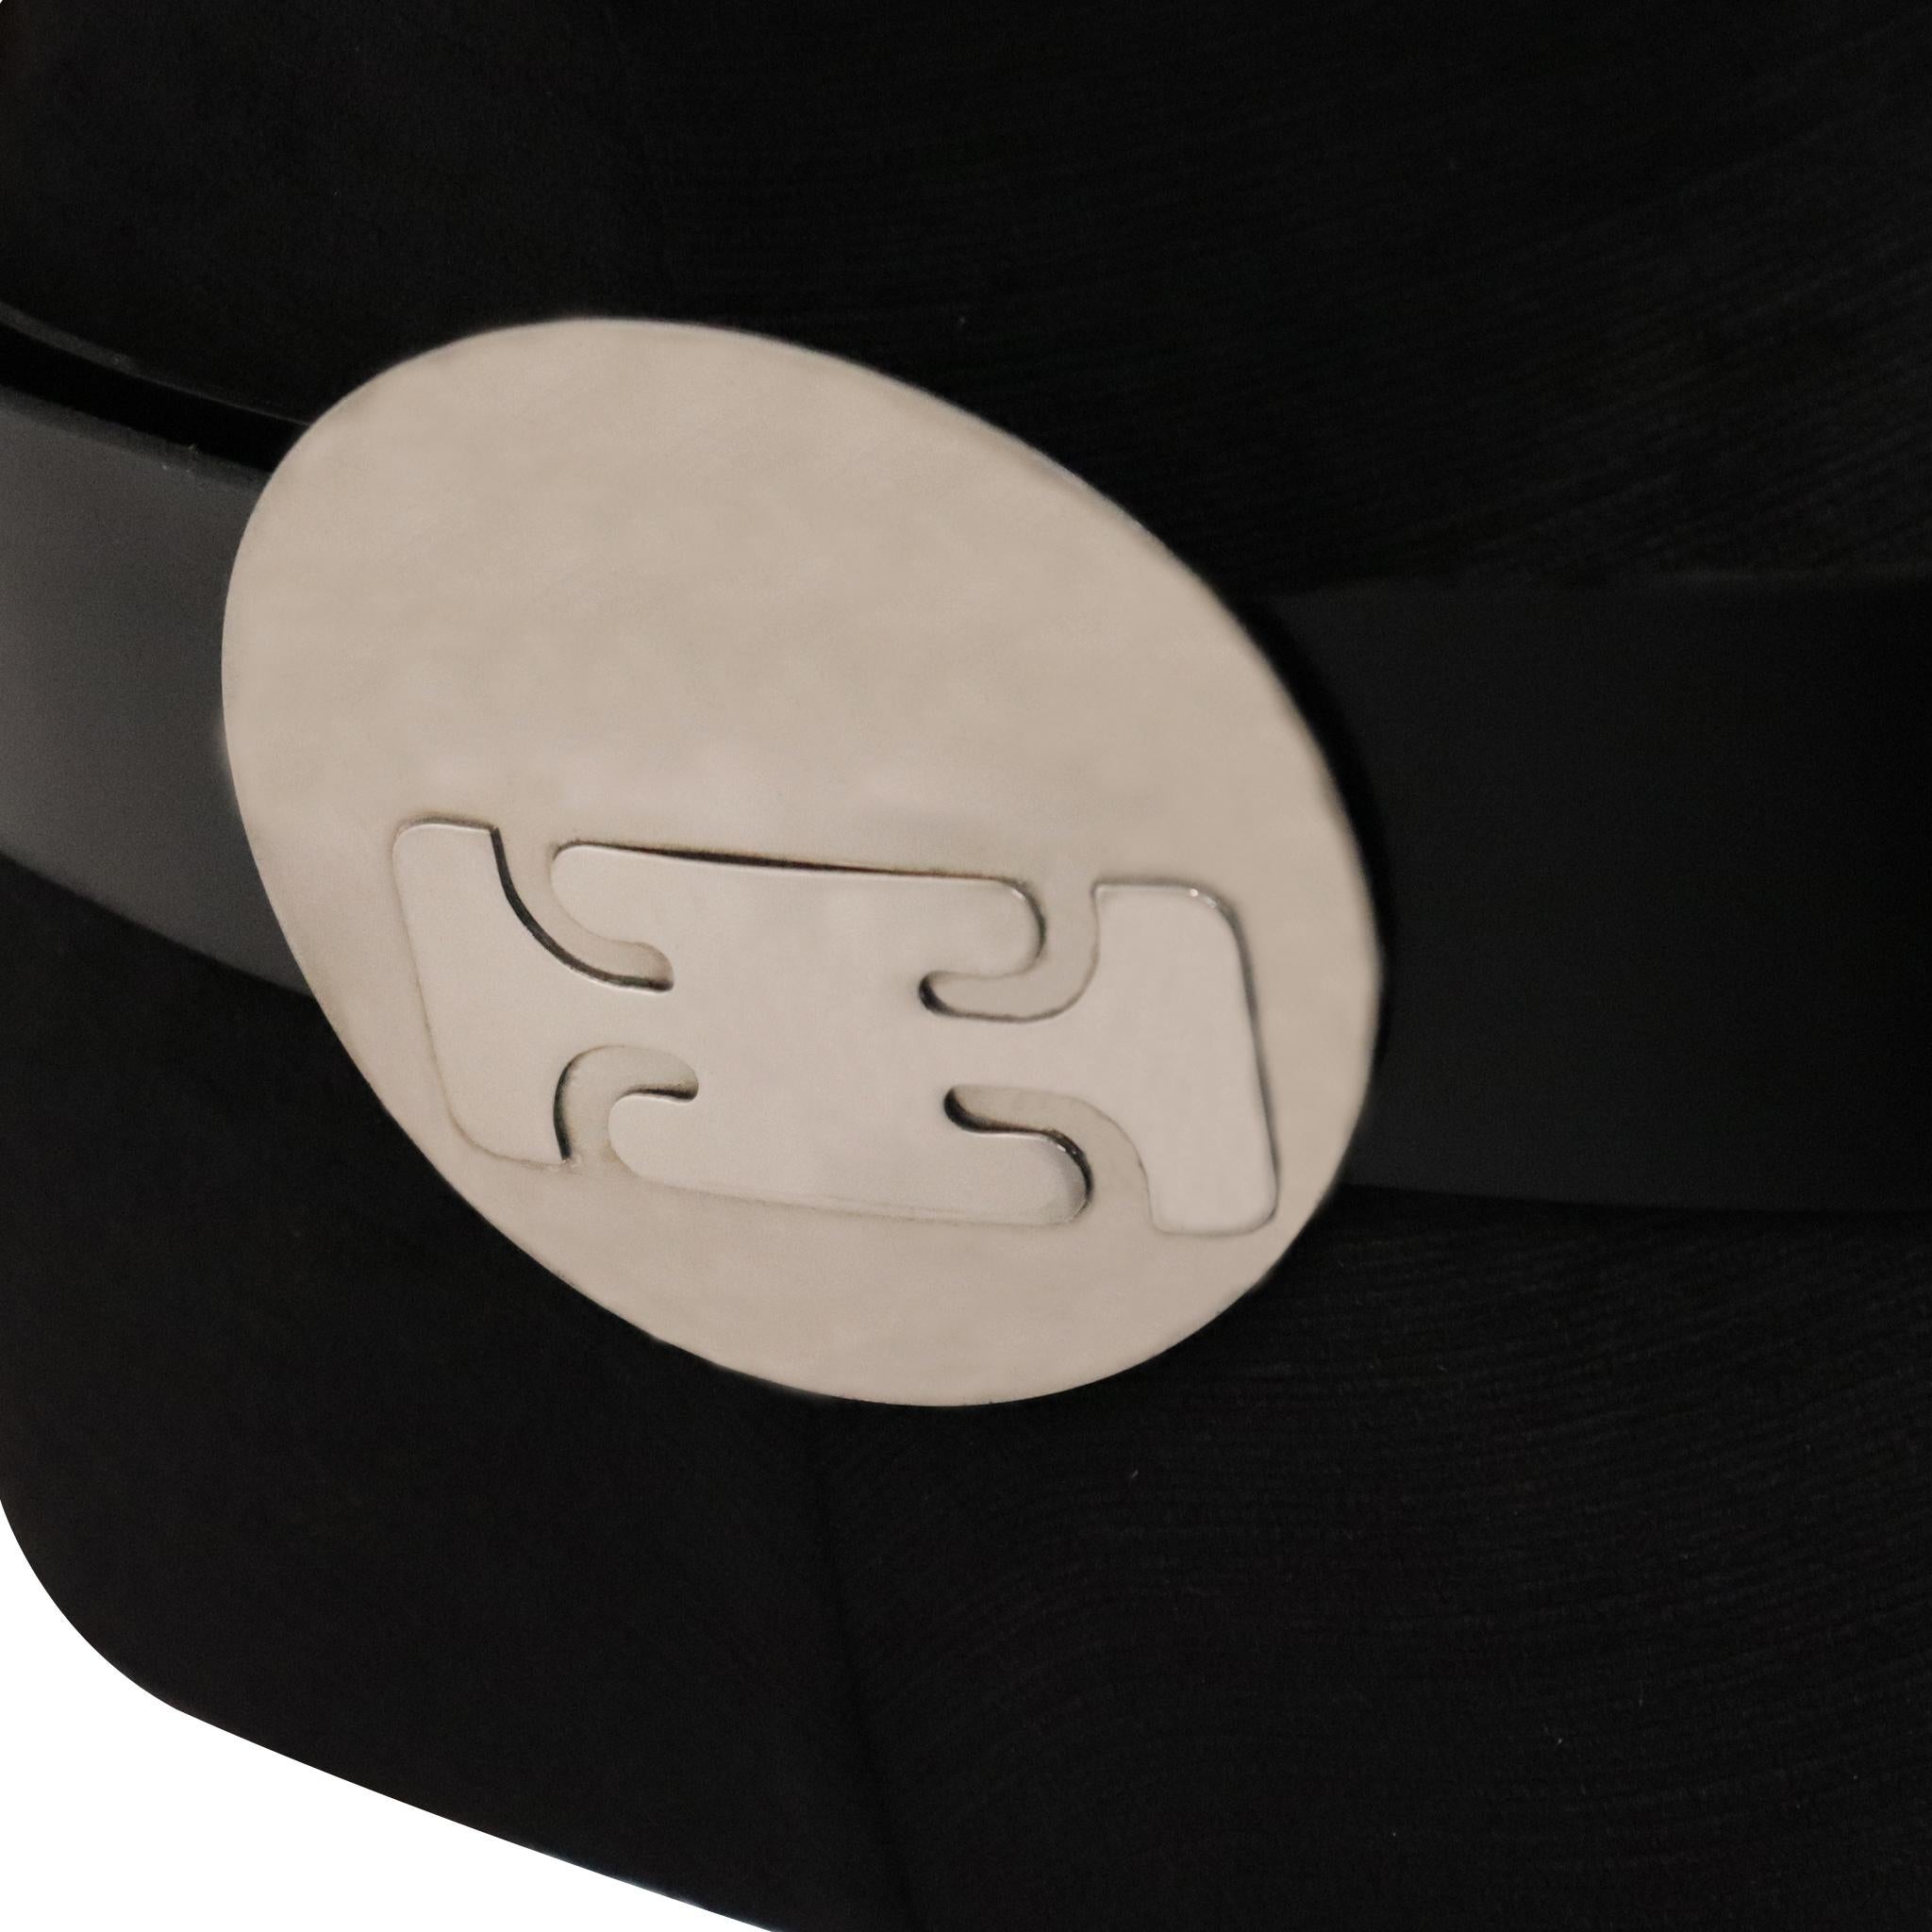 black belt with silver buckle